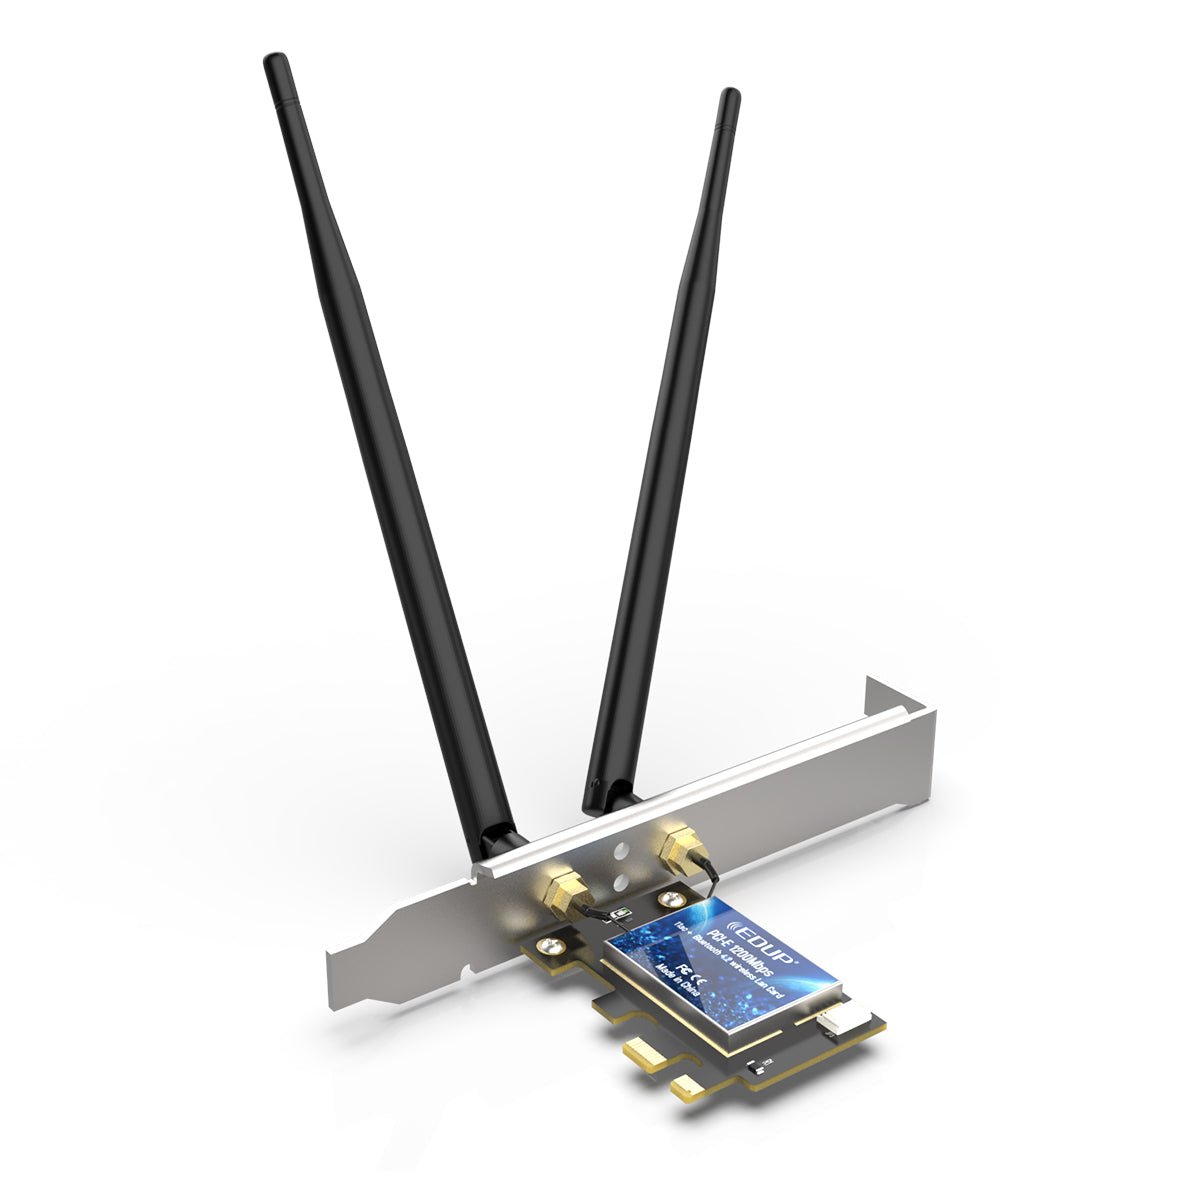 EDUP AC1200 WiFi + Bluetooth 4.2 PCI-E Network Adapter - I Gaming Computer | Australia Wide Shipping | Buy now, Pay Later with Afterpay, Klarna, Zip, Latitude & Paypal